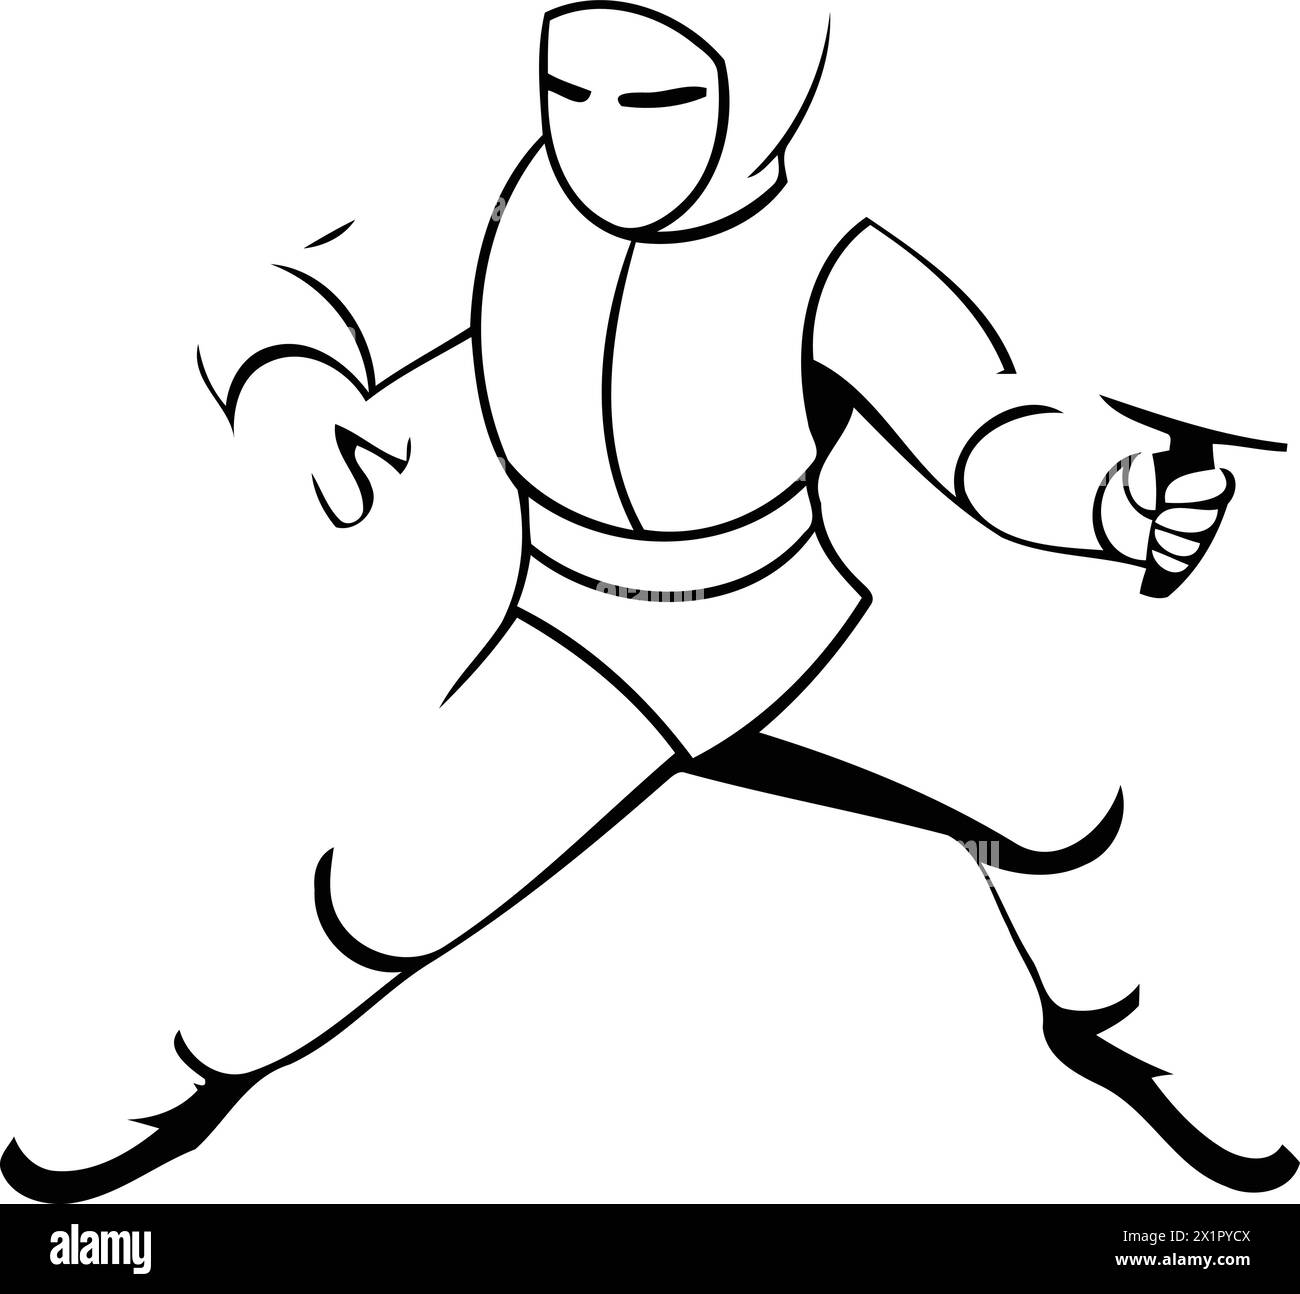 Fencer with a sword. Vector illustration isolated on white background. Stock Vector